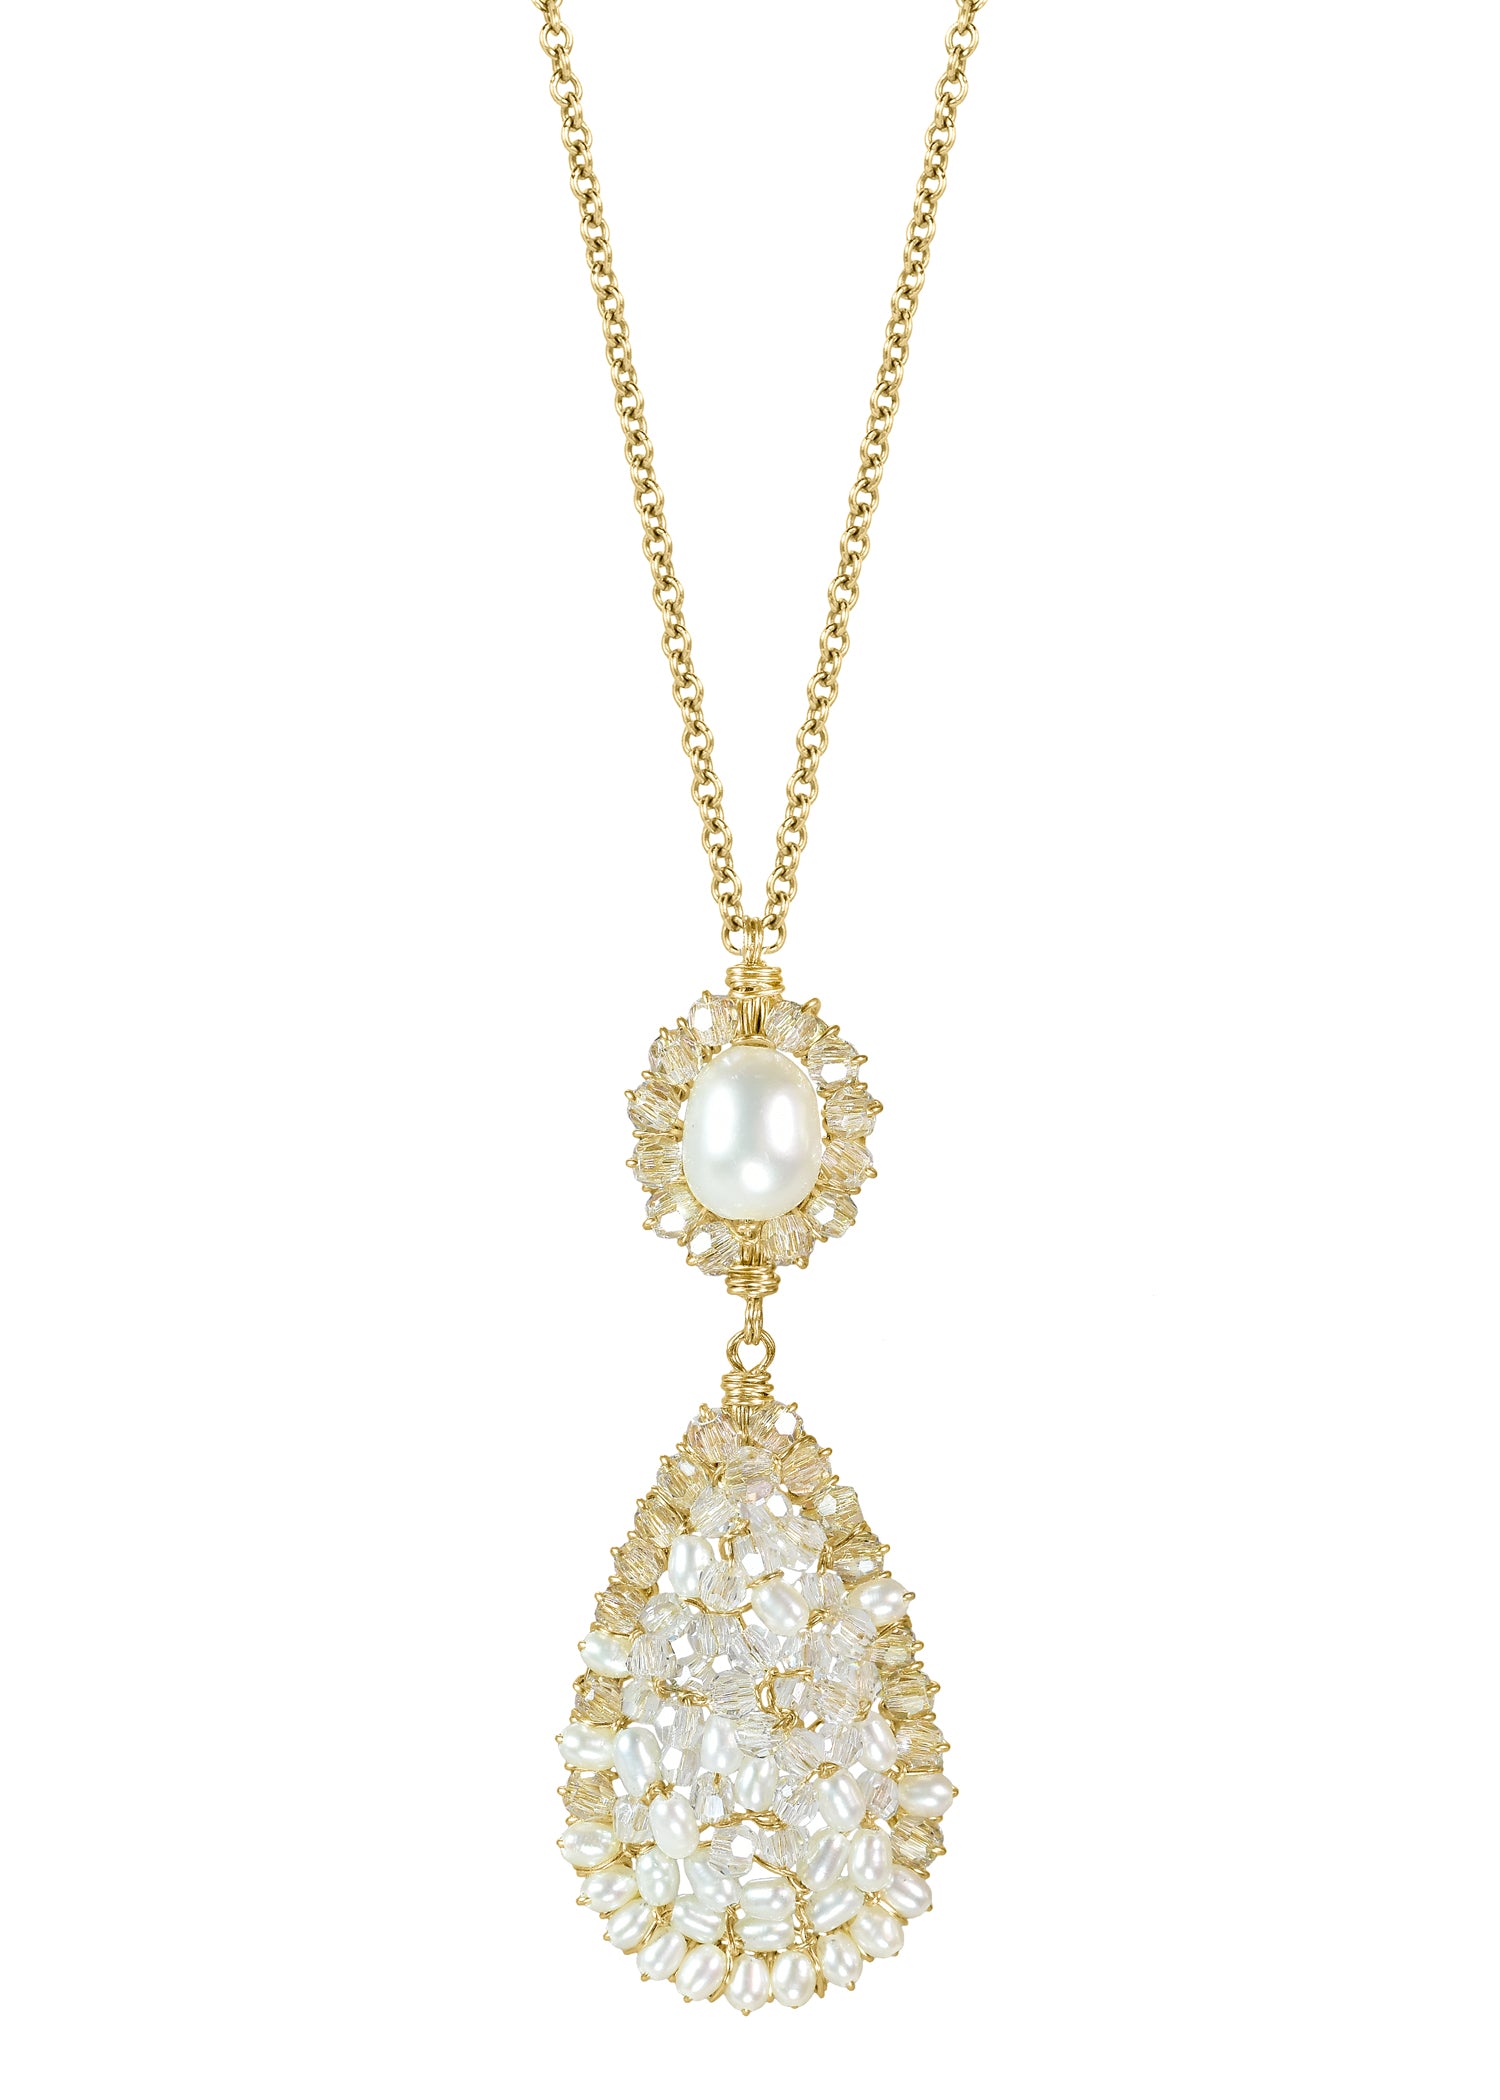 Crystal Freshwater pearl 14k gold fill Chain measures 18" in length Pendant measures 1-7/16" in length and 9/16" in width at the widest point Handmade in our Los Angeles studio